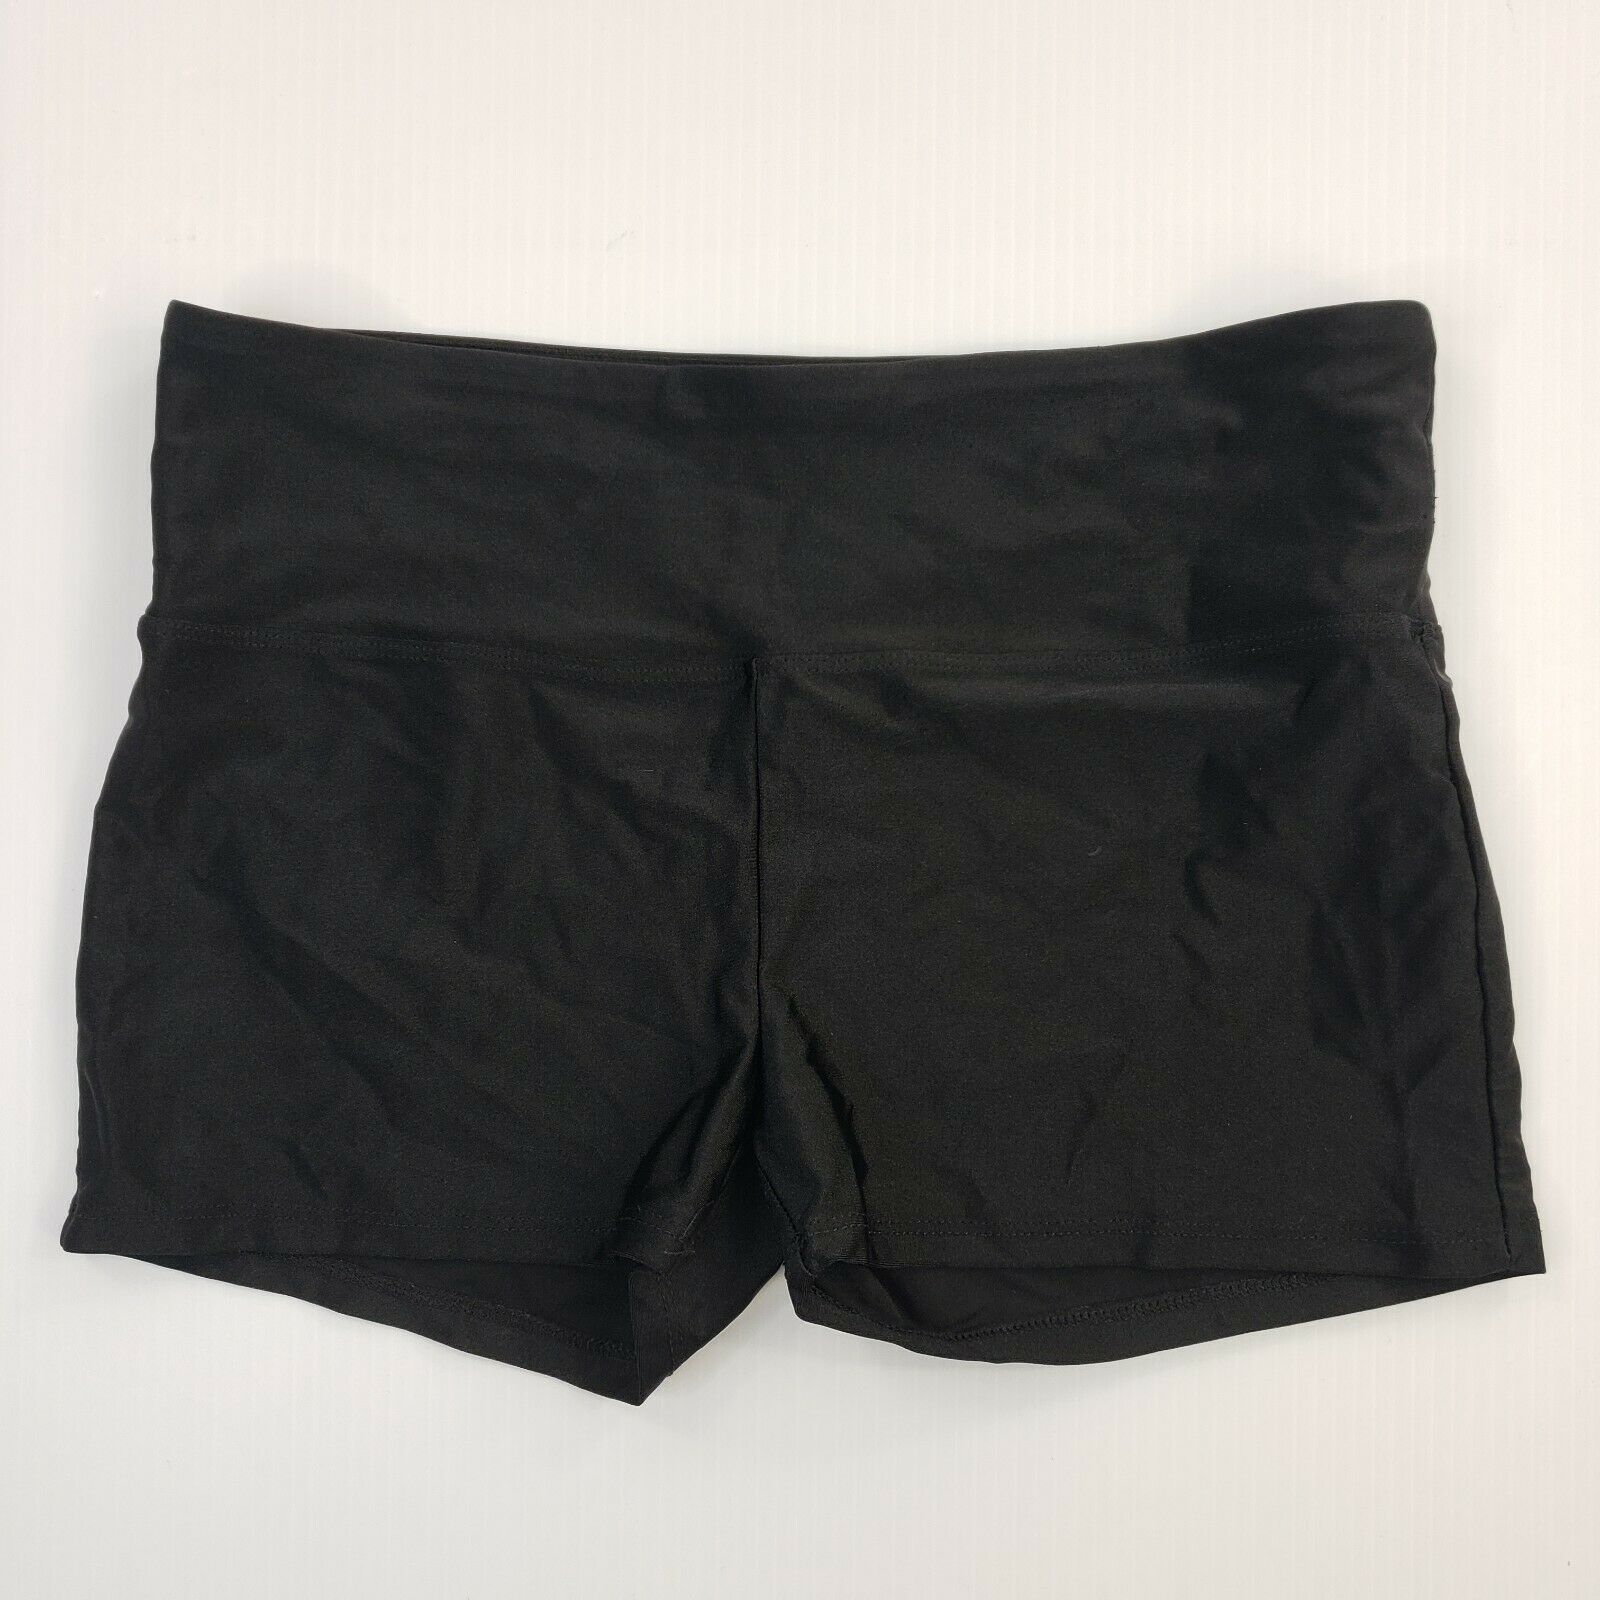 Forever 21 Womens Black Stretch Workout Athletic Running Gym Shorts Ladies Small